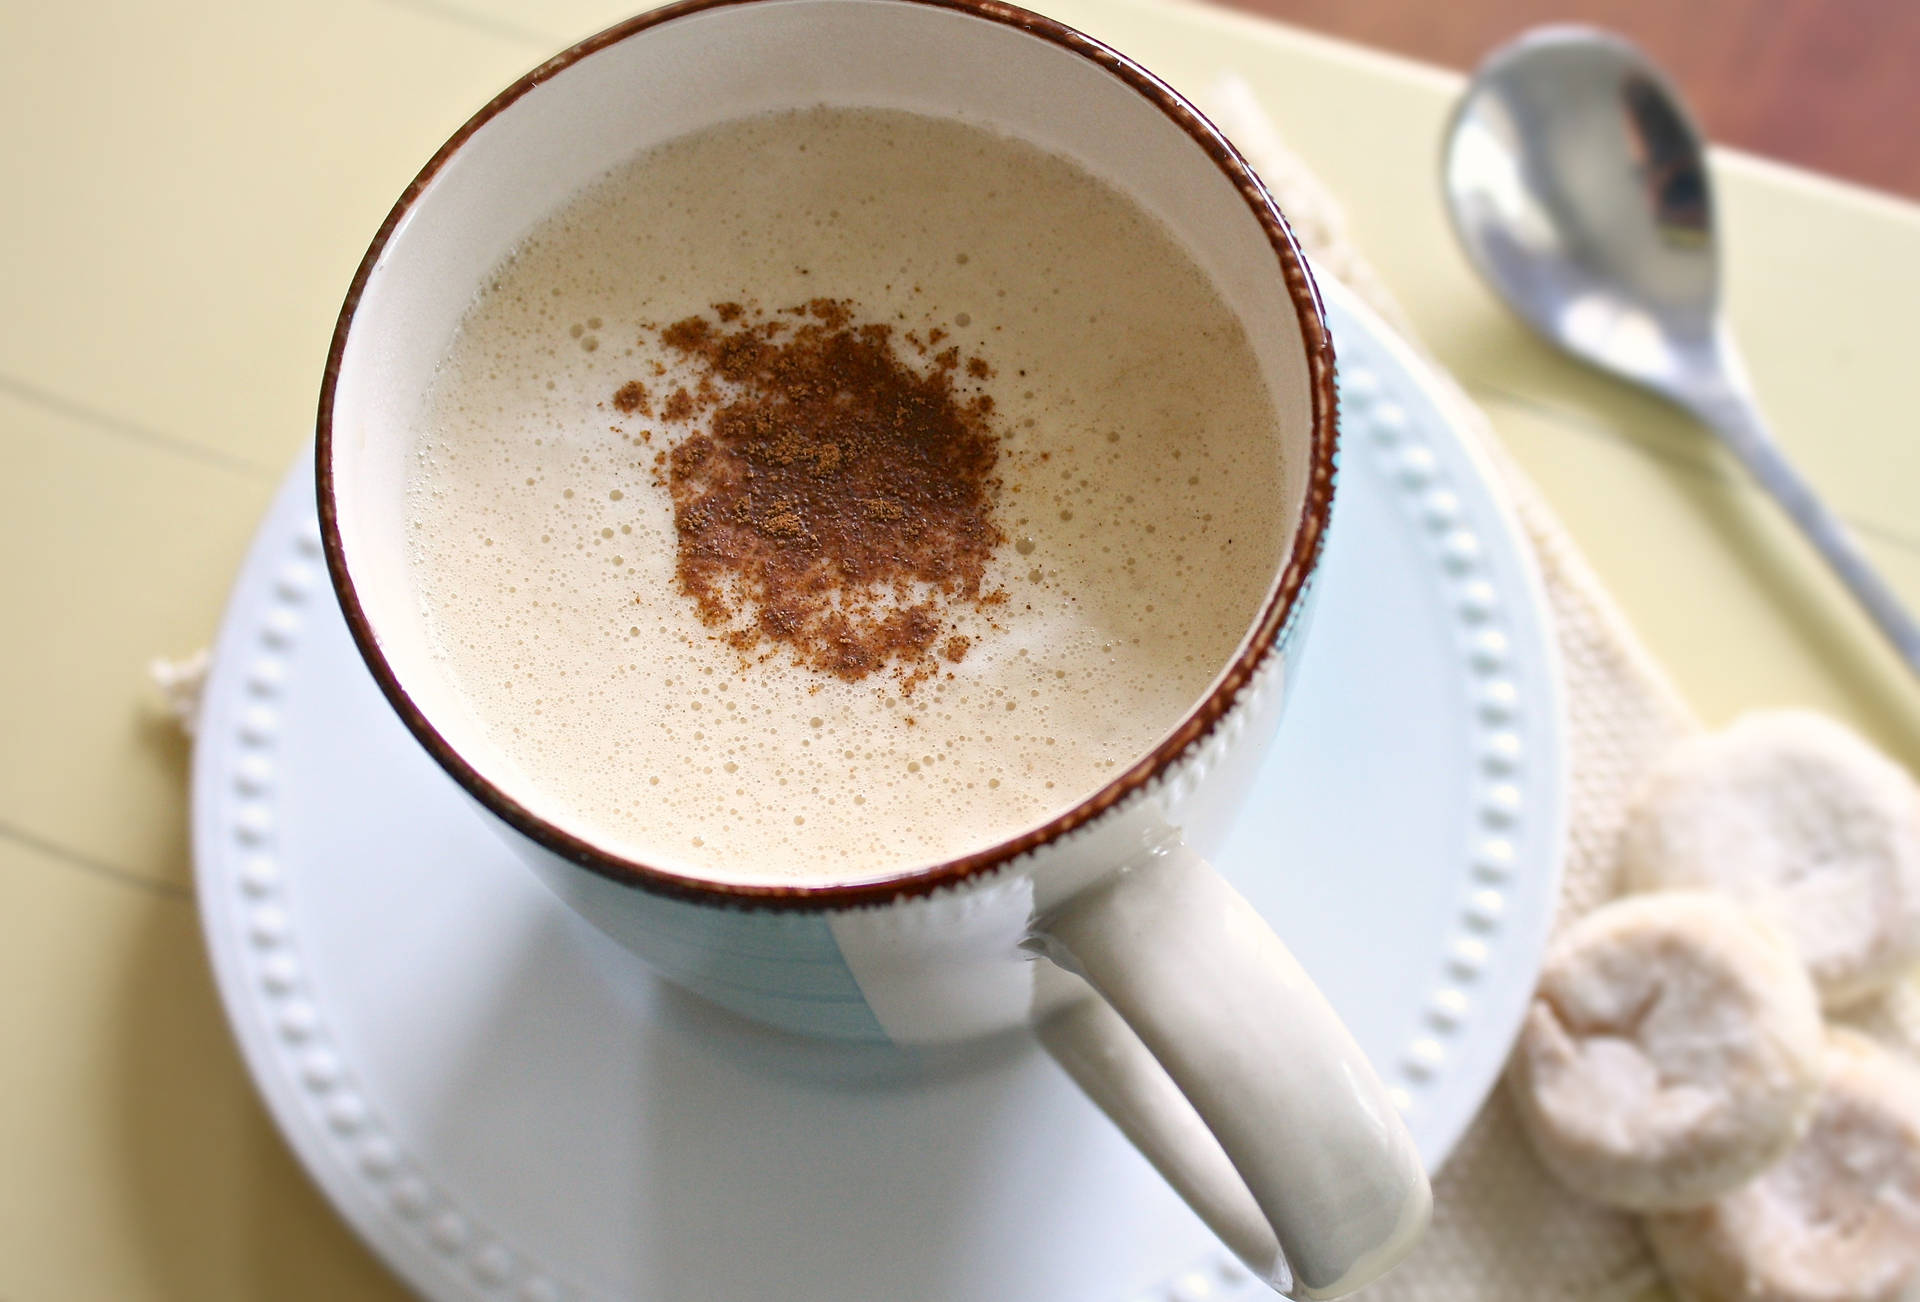 A steaming cup of freshly brewed cinnamon-flavored coffee with a creamy layer of foam Wallpaper